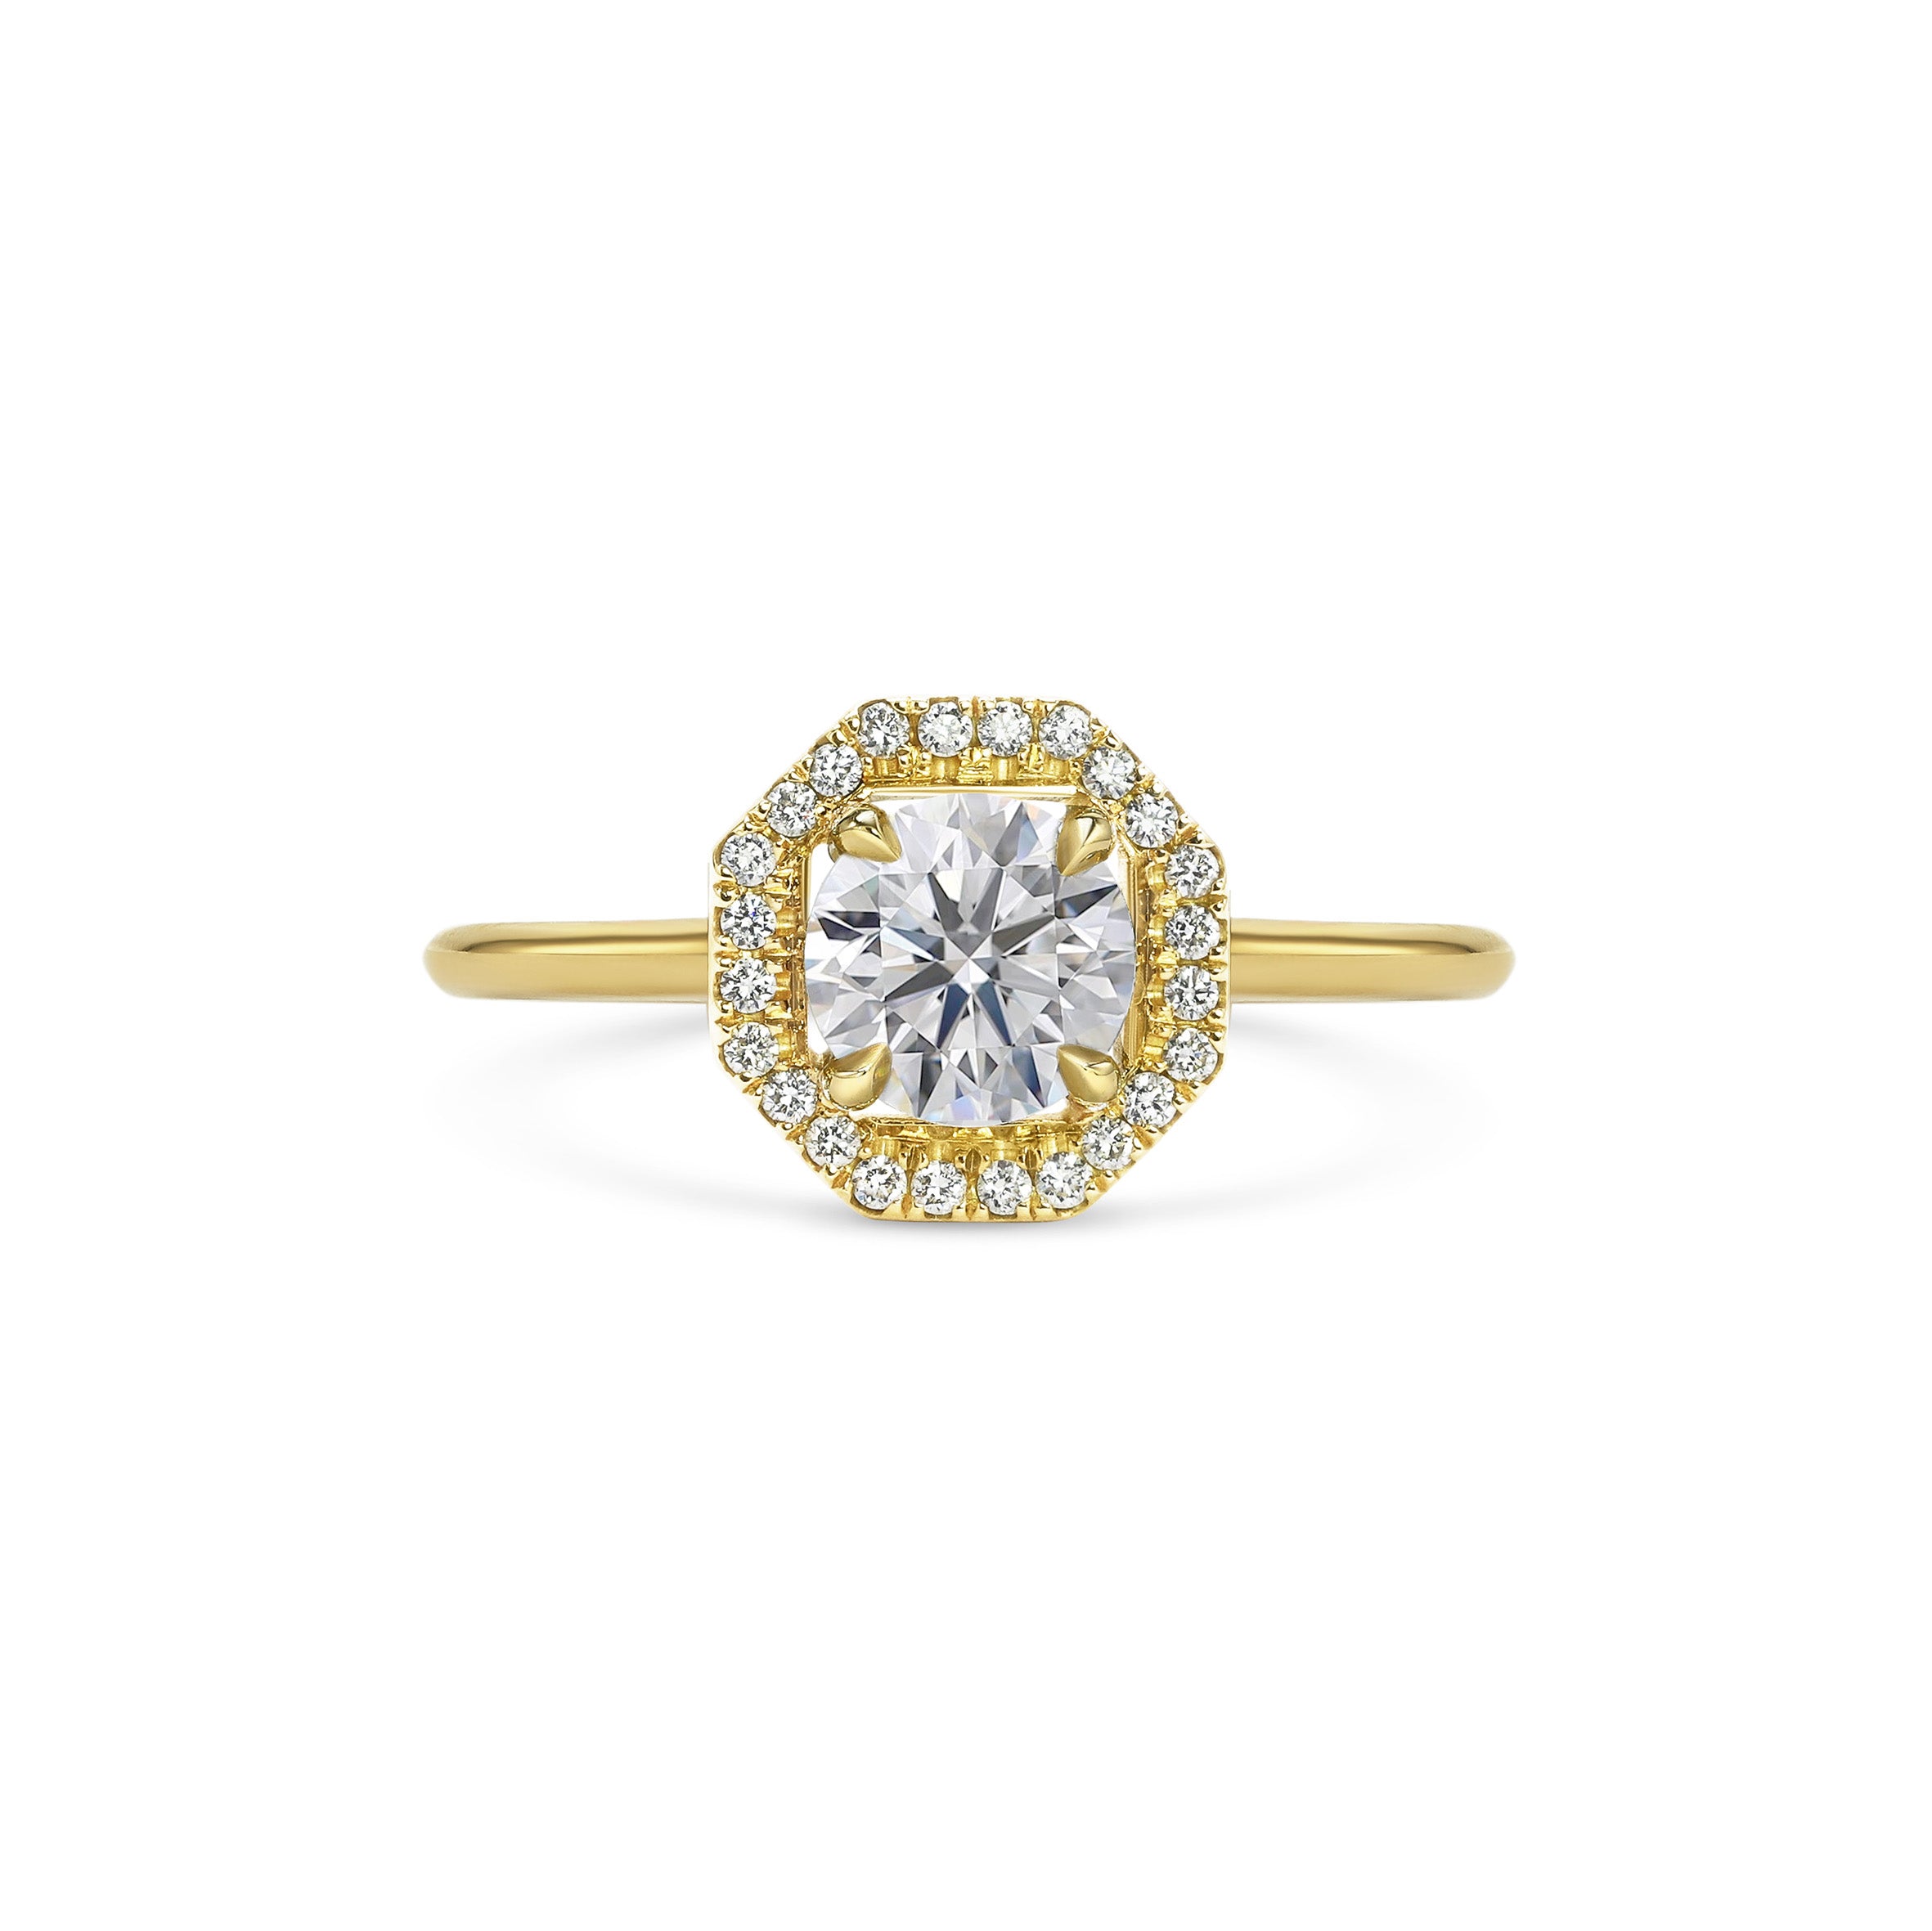 The Adonis Ring by East London jeweller Rachel Boston | Discover our collections of unique and timeless engagement rings, wedding rings, and modern fine jewellery.